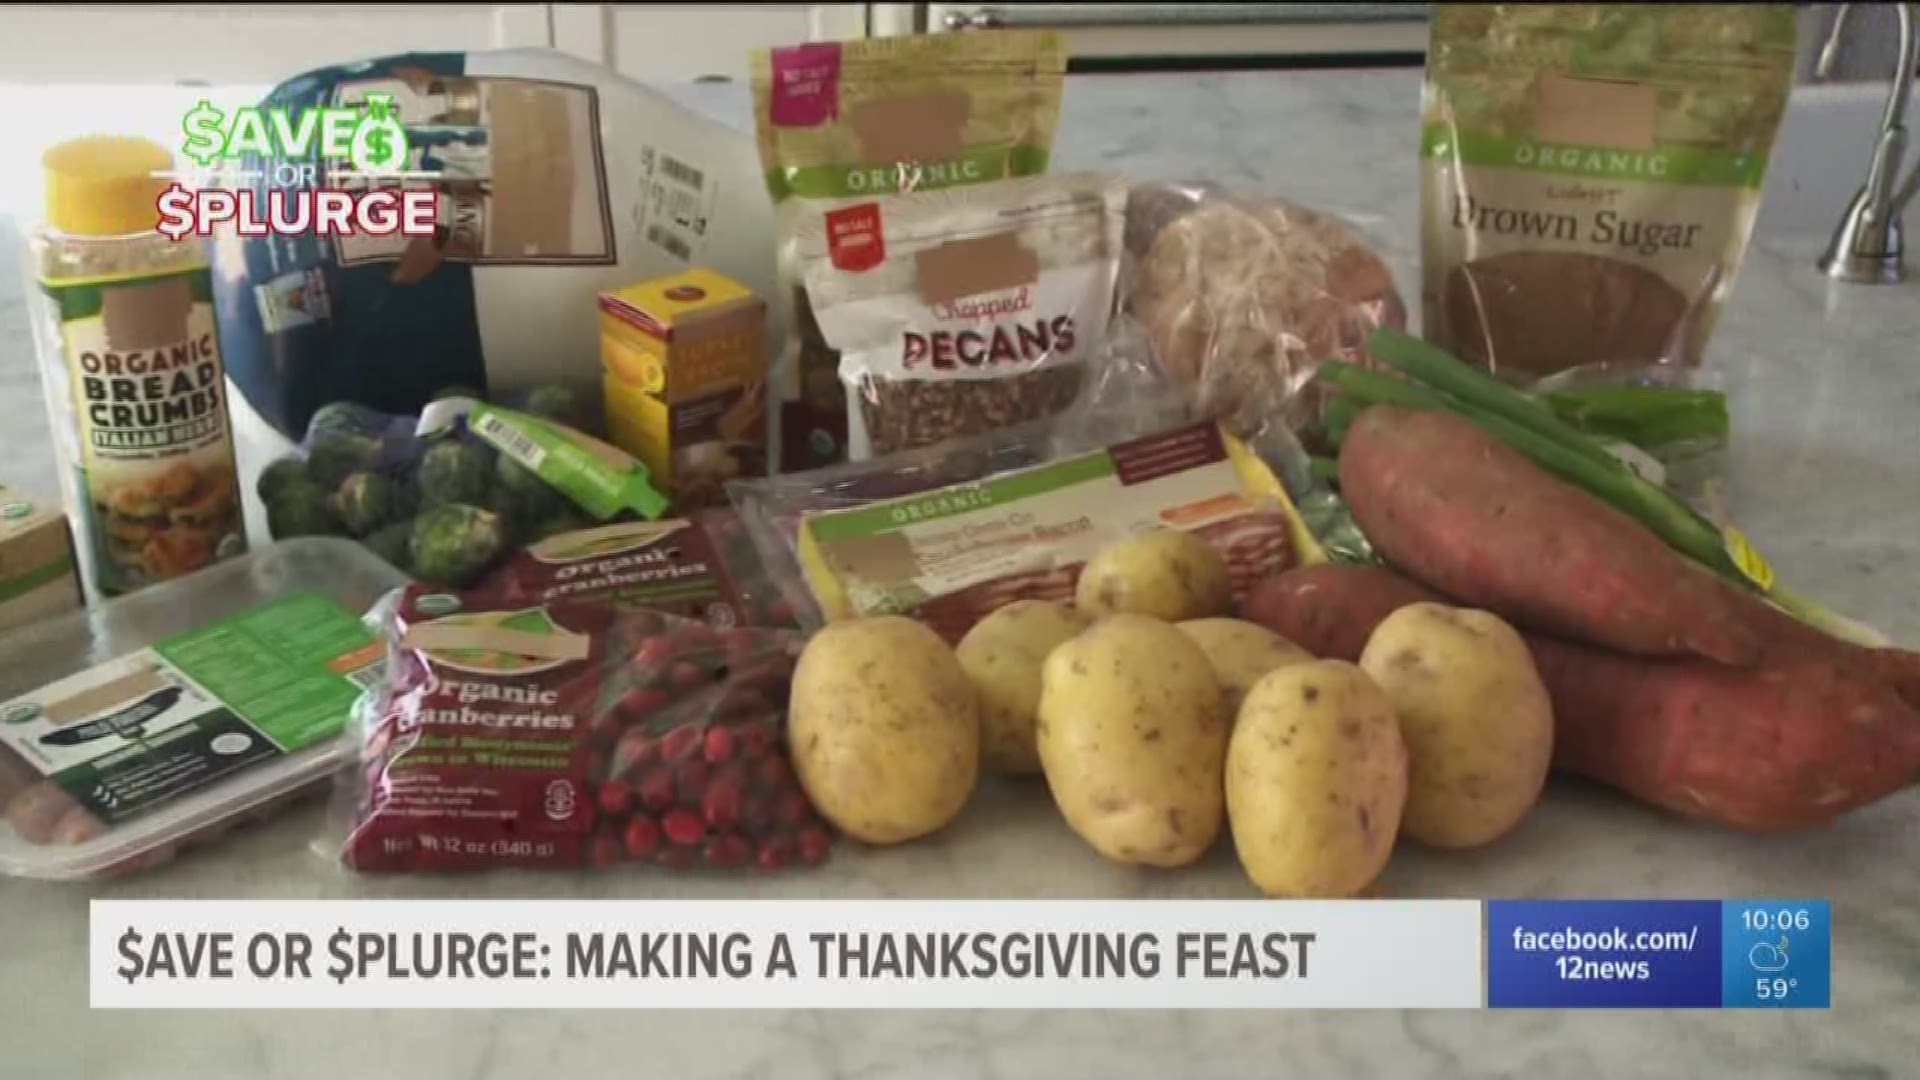 Can you get away with spending less on your Thanksgiving dinner?